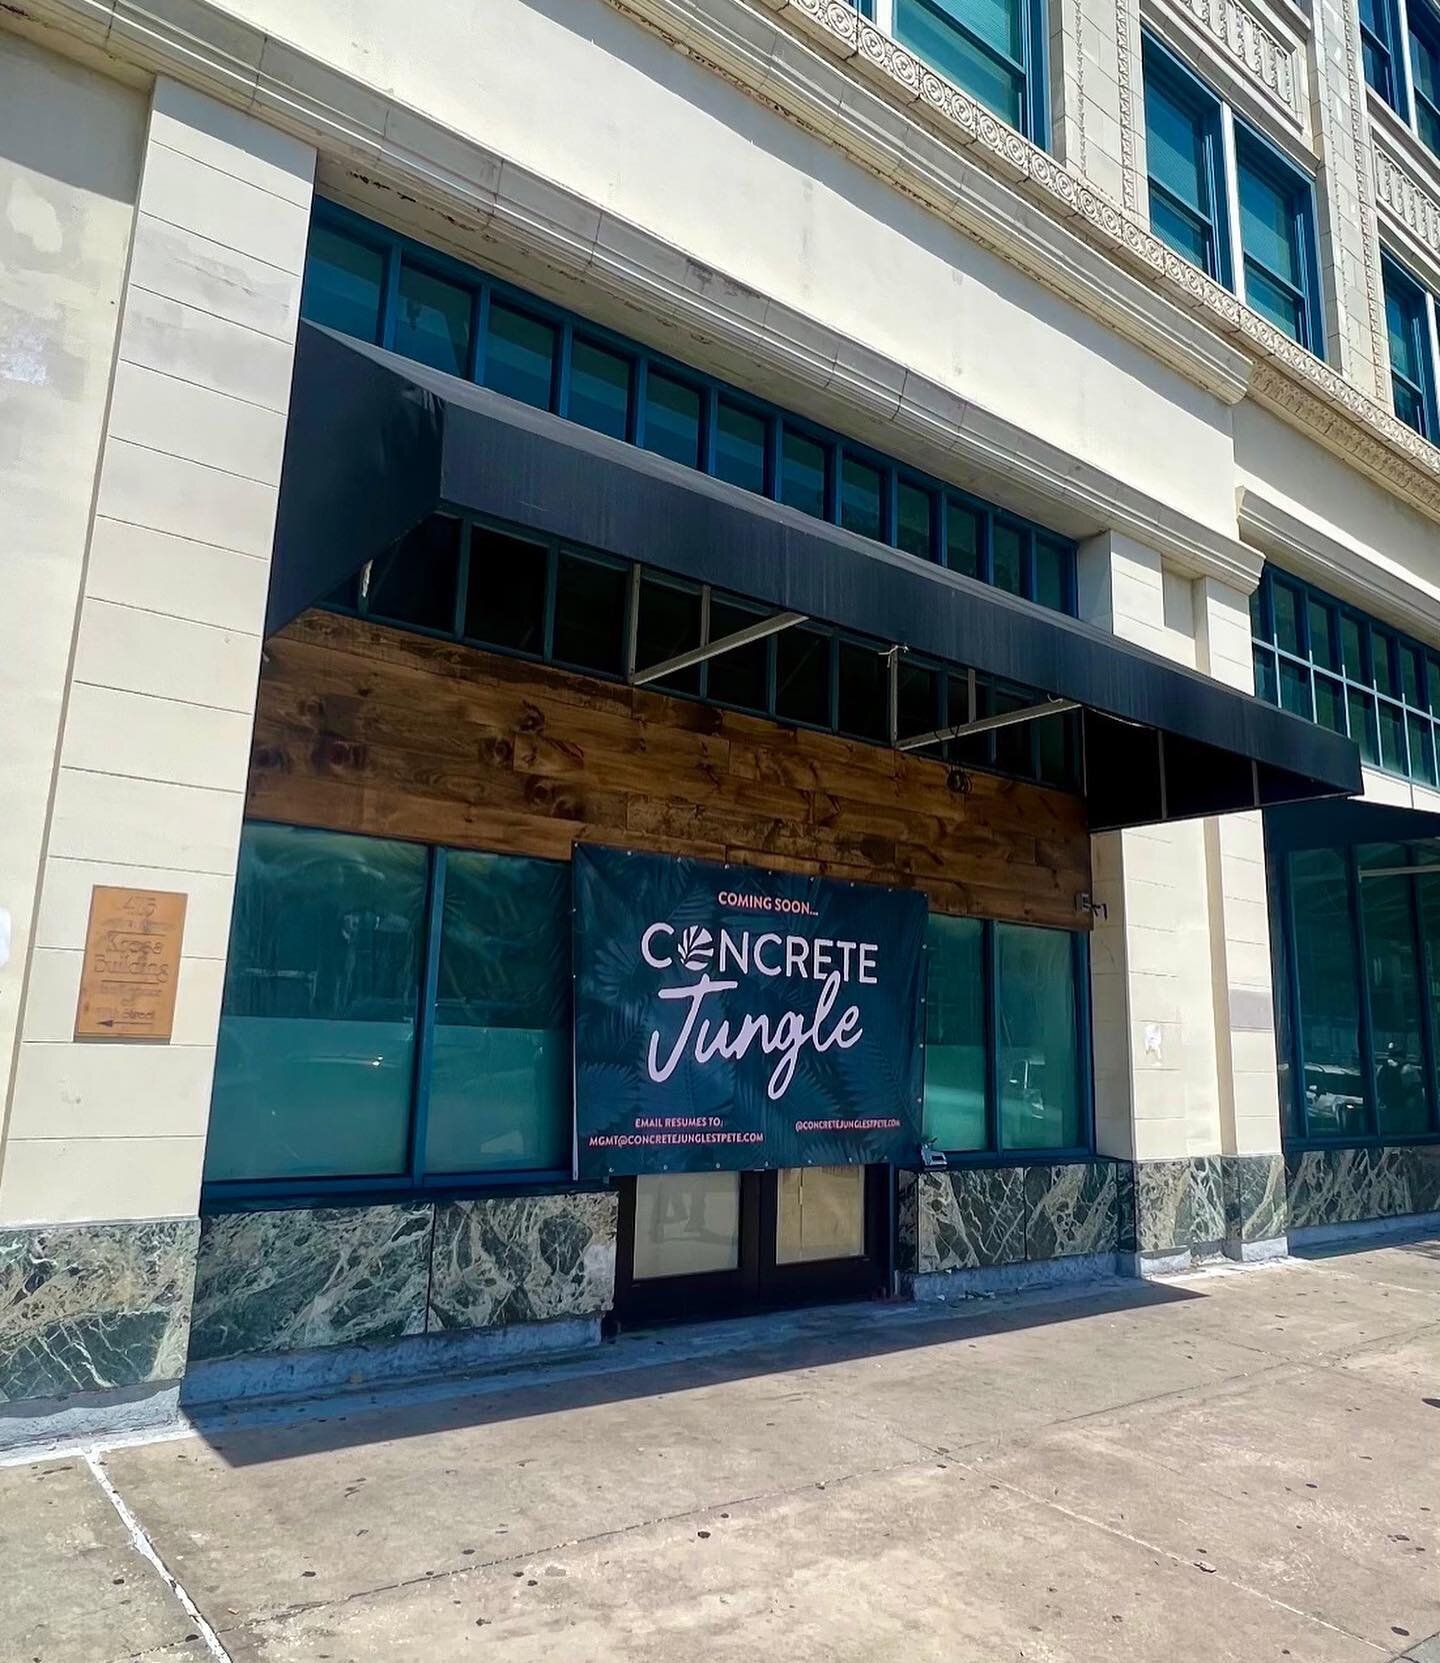 Good things grow! Excited to announce our latest concept @concretejunglestpete, coming soon. 🐆🌿🥃 

#wherethewildthingsare #itsajungleoutthere #concretejunglestpete #stpetersburgfoodie #stpetersburgfoodies #stpete #stpeteflorida #stpetersburg #tamp